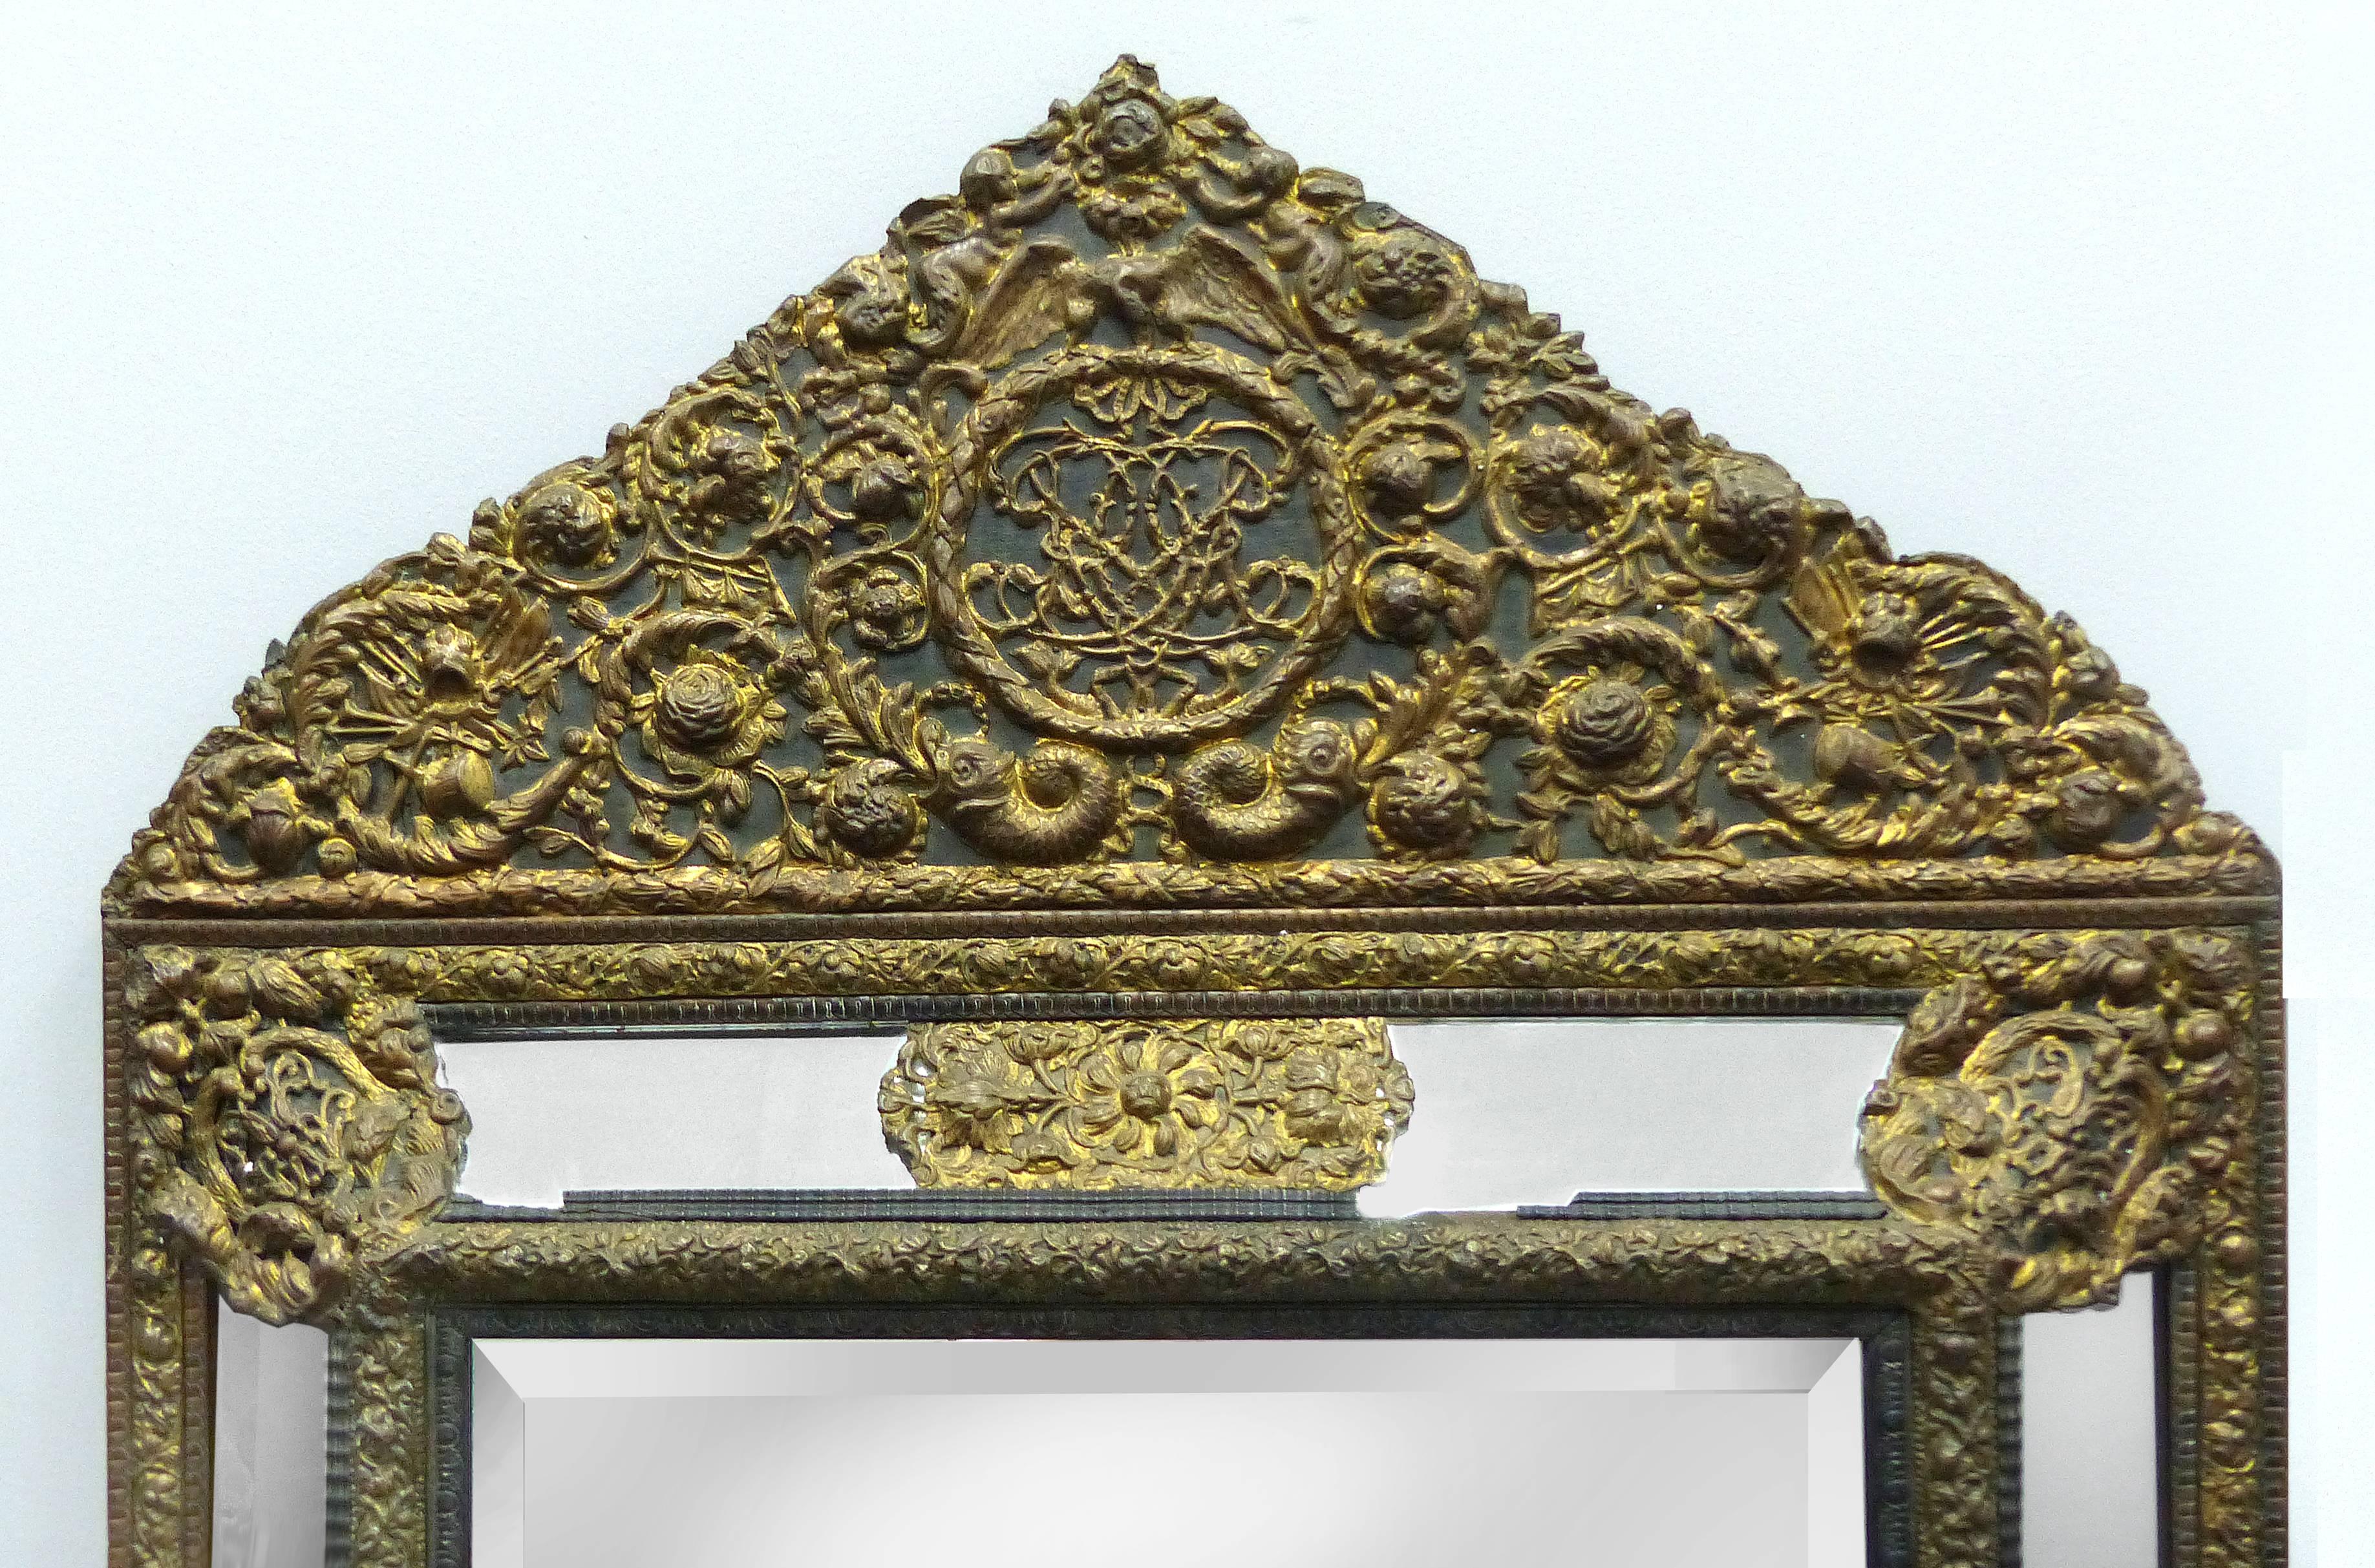 Offered is an 18th century Dutch Colonial bronze repose mirror with an ornate cornice and elaborate detailed panels. The main beveled mirror is a more modern.